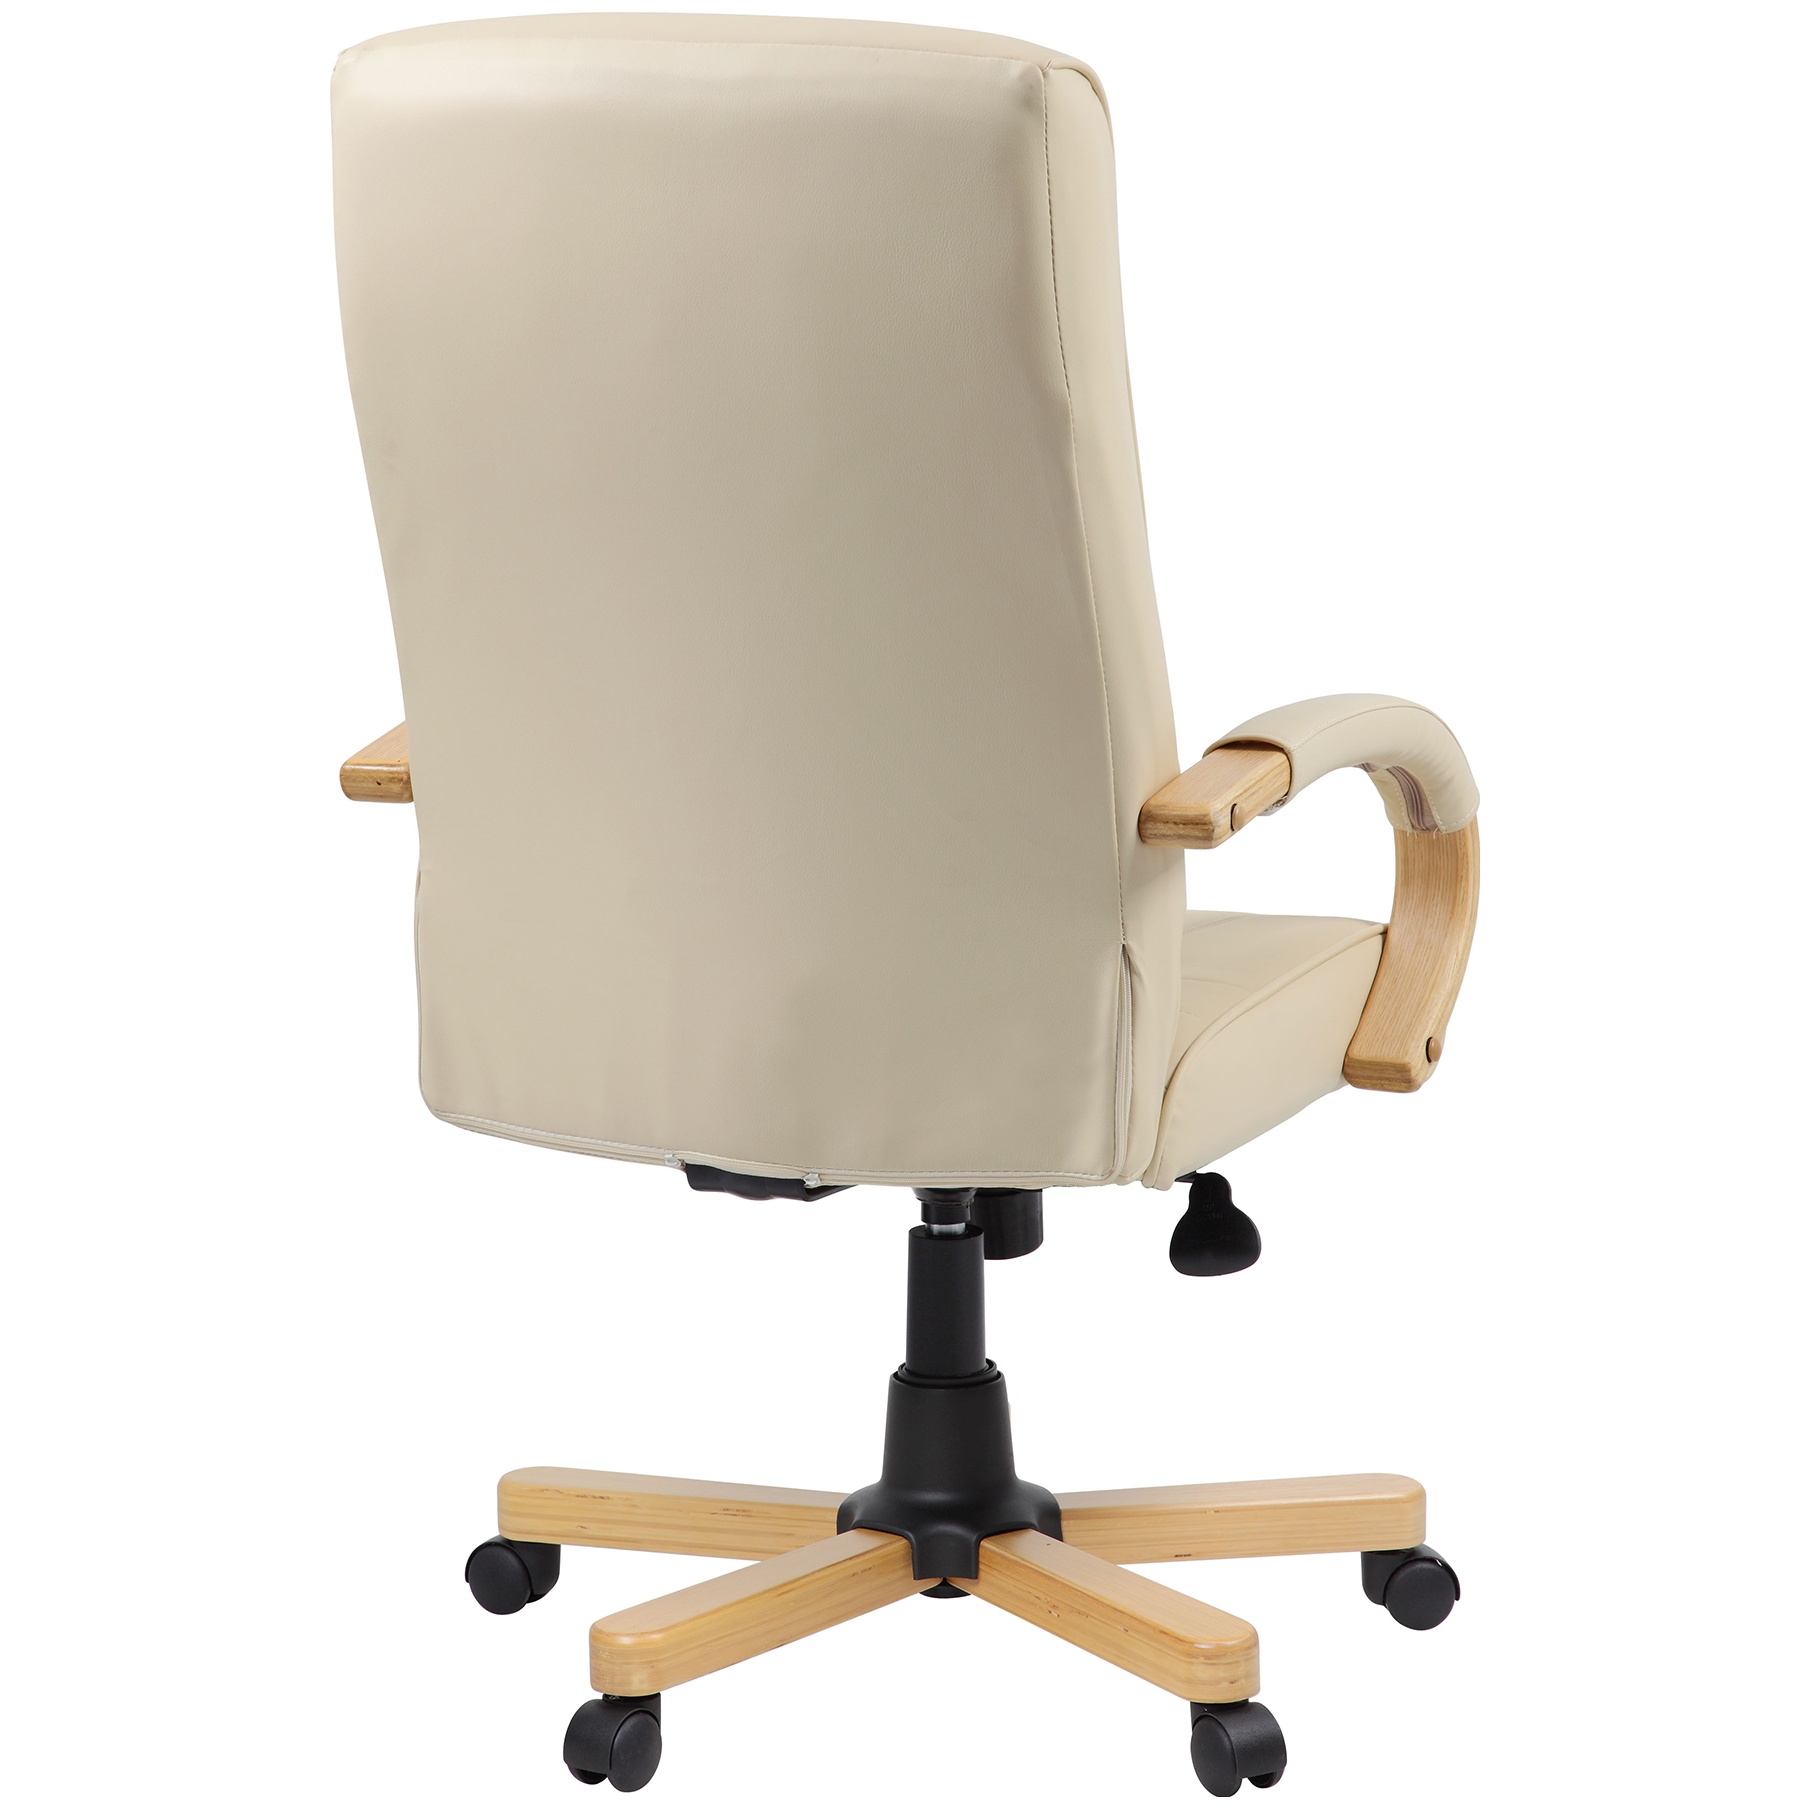 Farnham Cream Leather Office Chair, Wood Leather Office Chair Uk